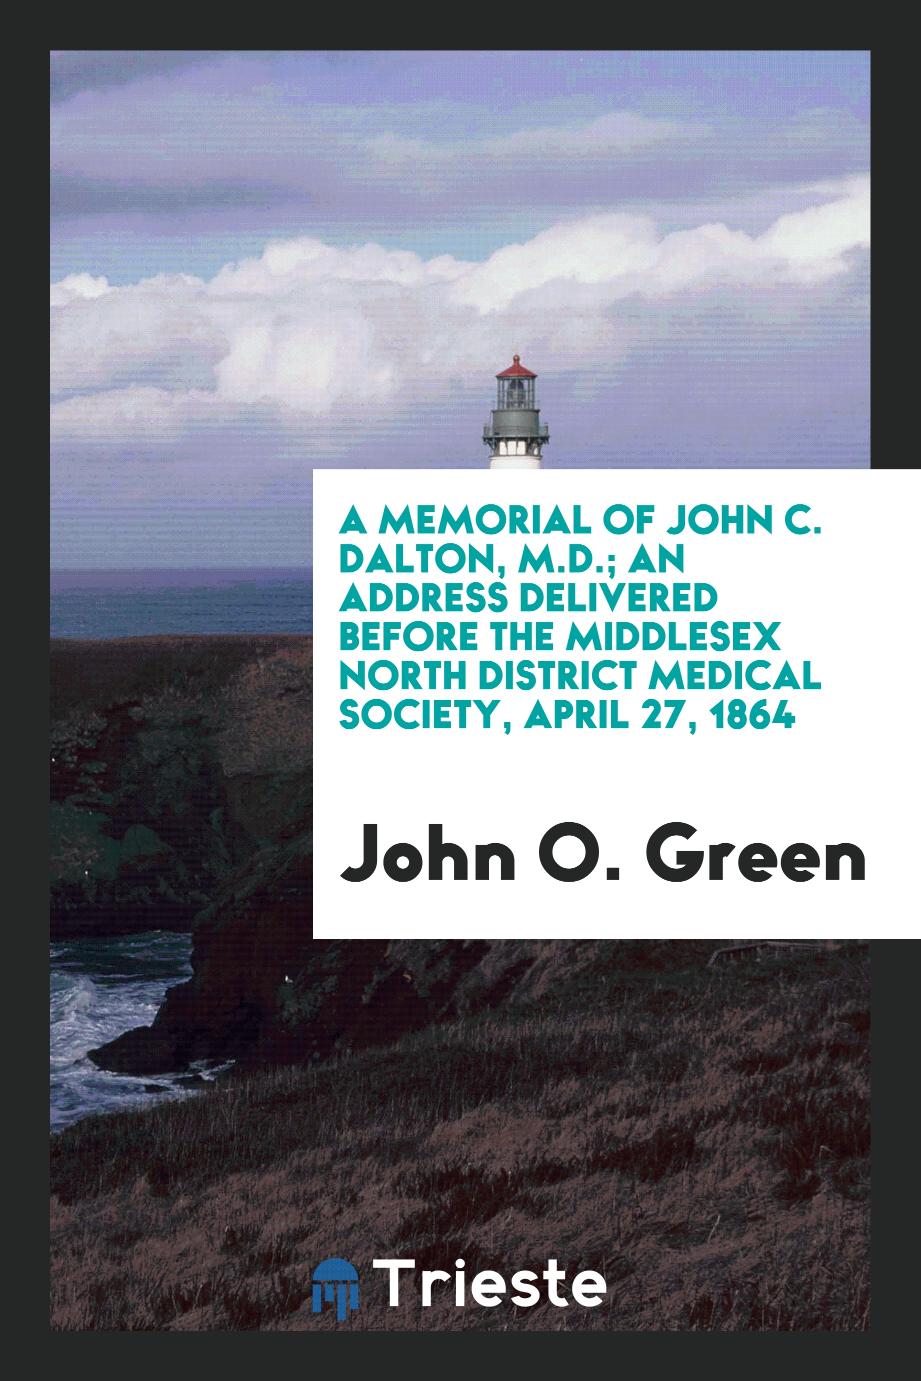 A memorial of John C. Dalton, M.D.; an address delivered before the Middlesex north district medical society, April 27, 1864